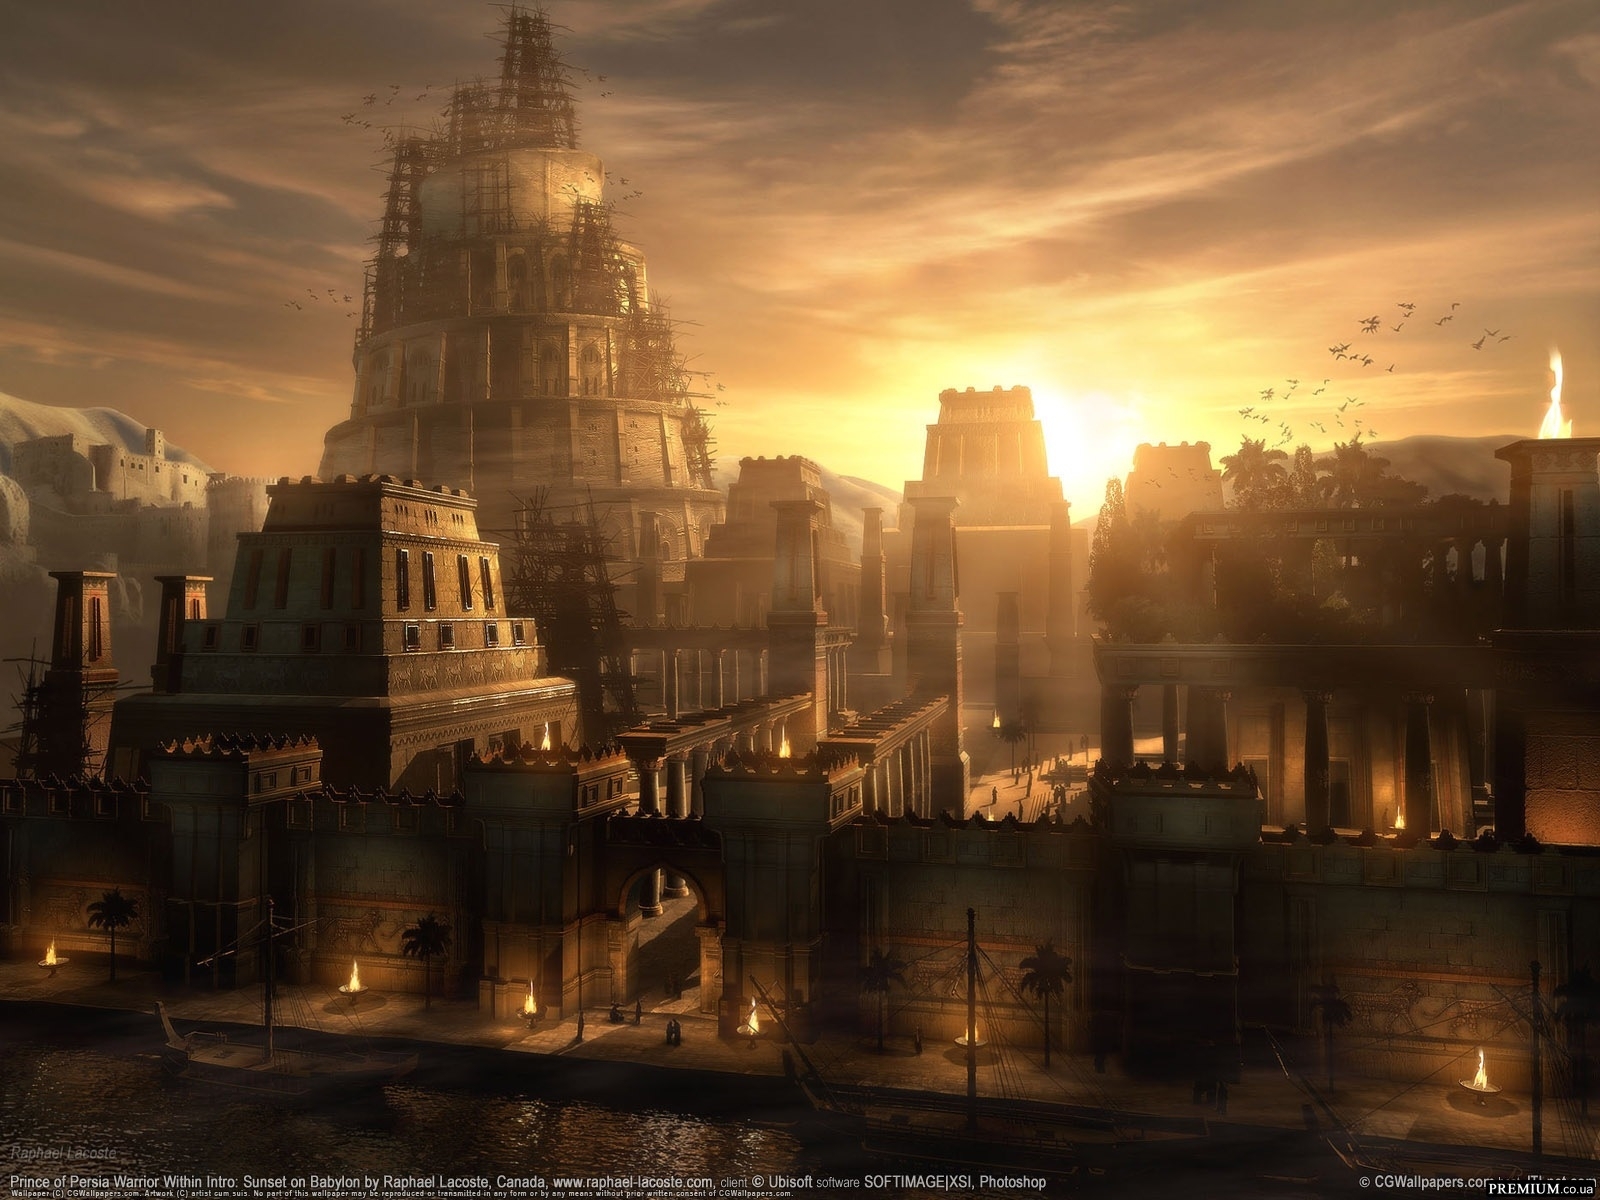 android prince of persia, games, cities, architecture, orange